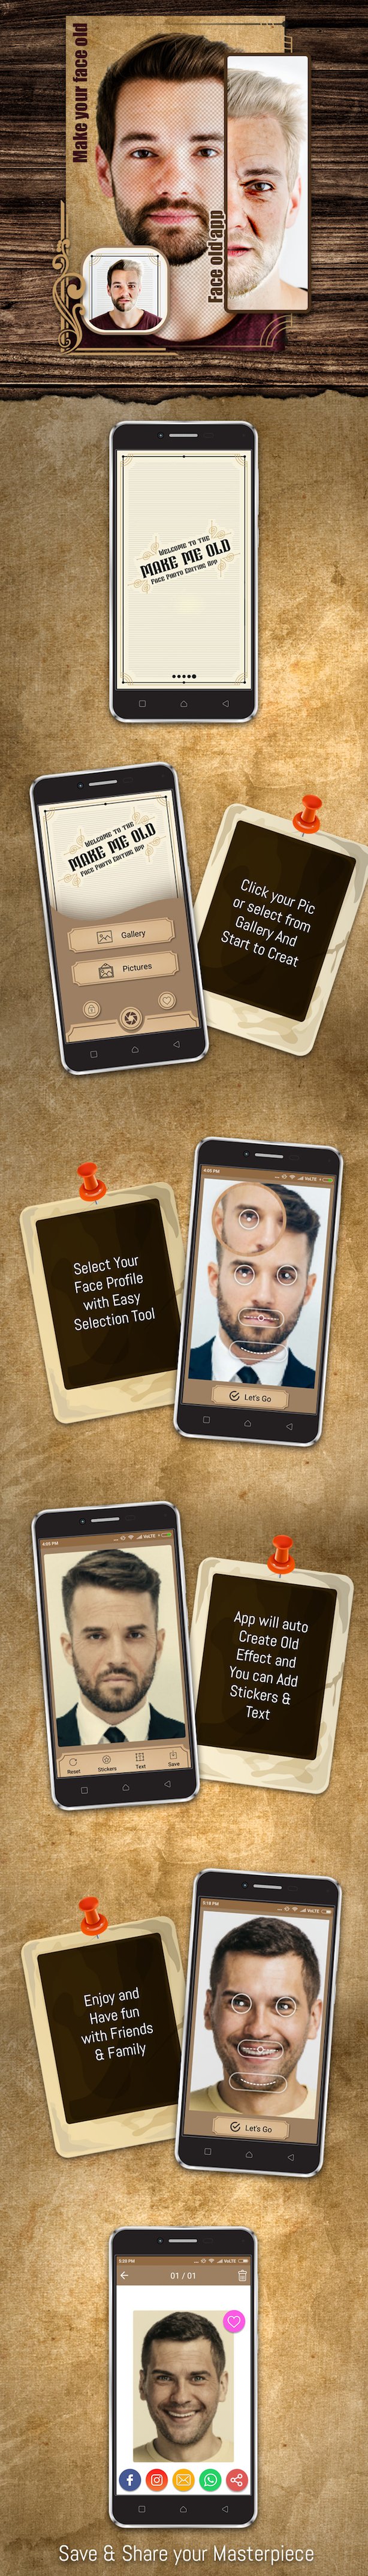 Make your face old , face old app - 1